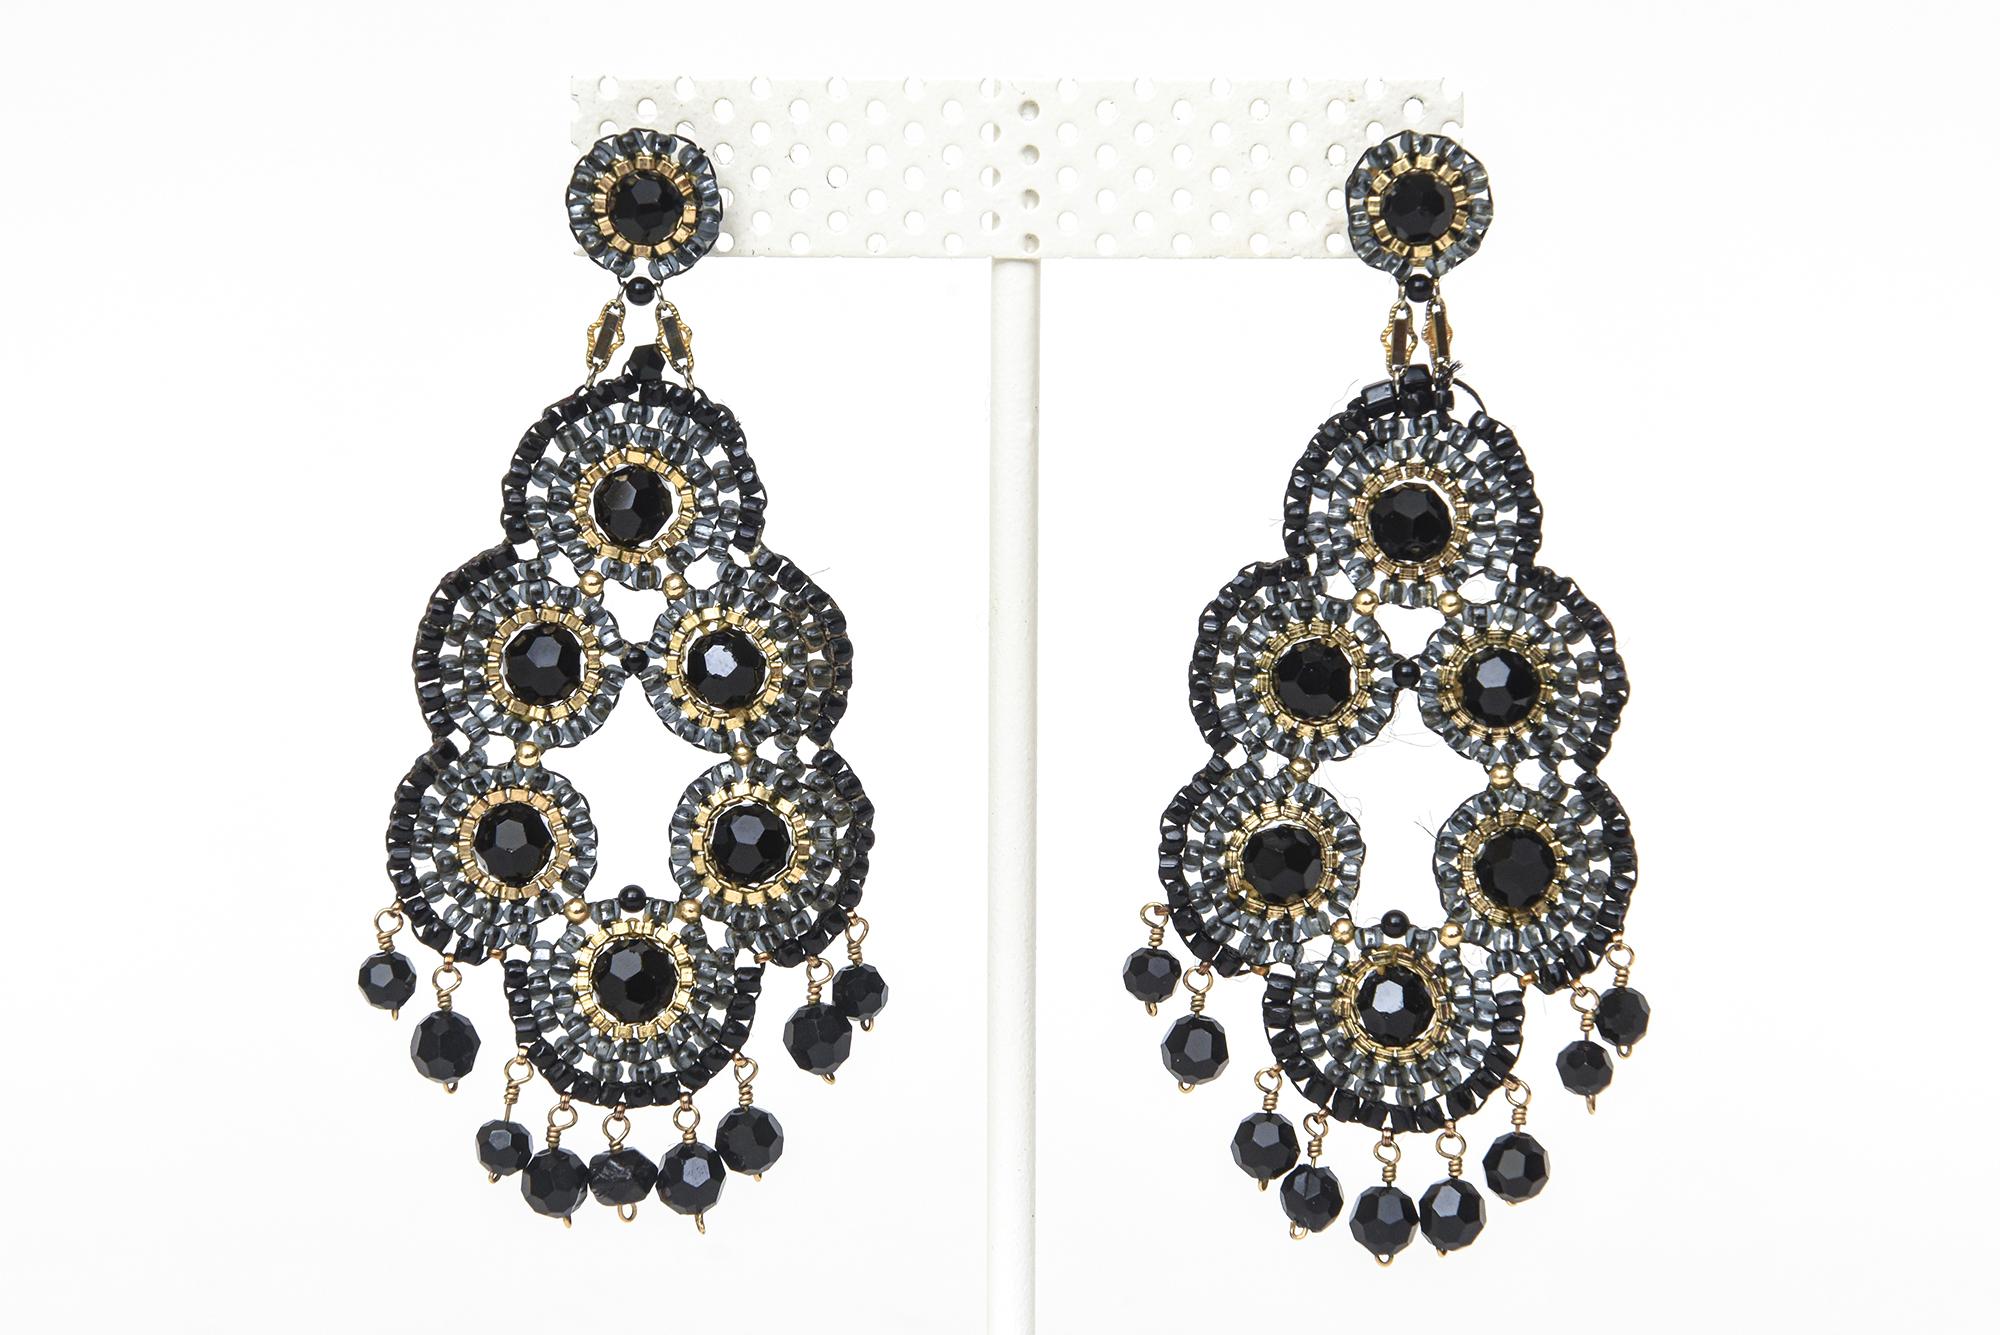 These dramatic Miguel Ases beaded chandelier pierced earrings have gold metal and black onyx beads. The lightweight of the earrings is great so it does not weigh down your earlobe. Comes with the original pouch. Originally from Neiman Marcus. From